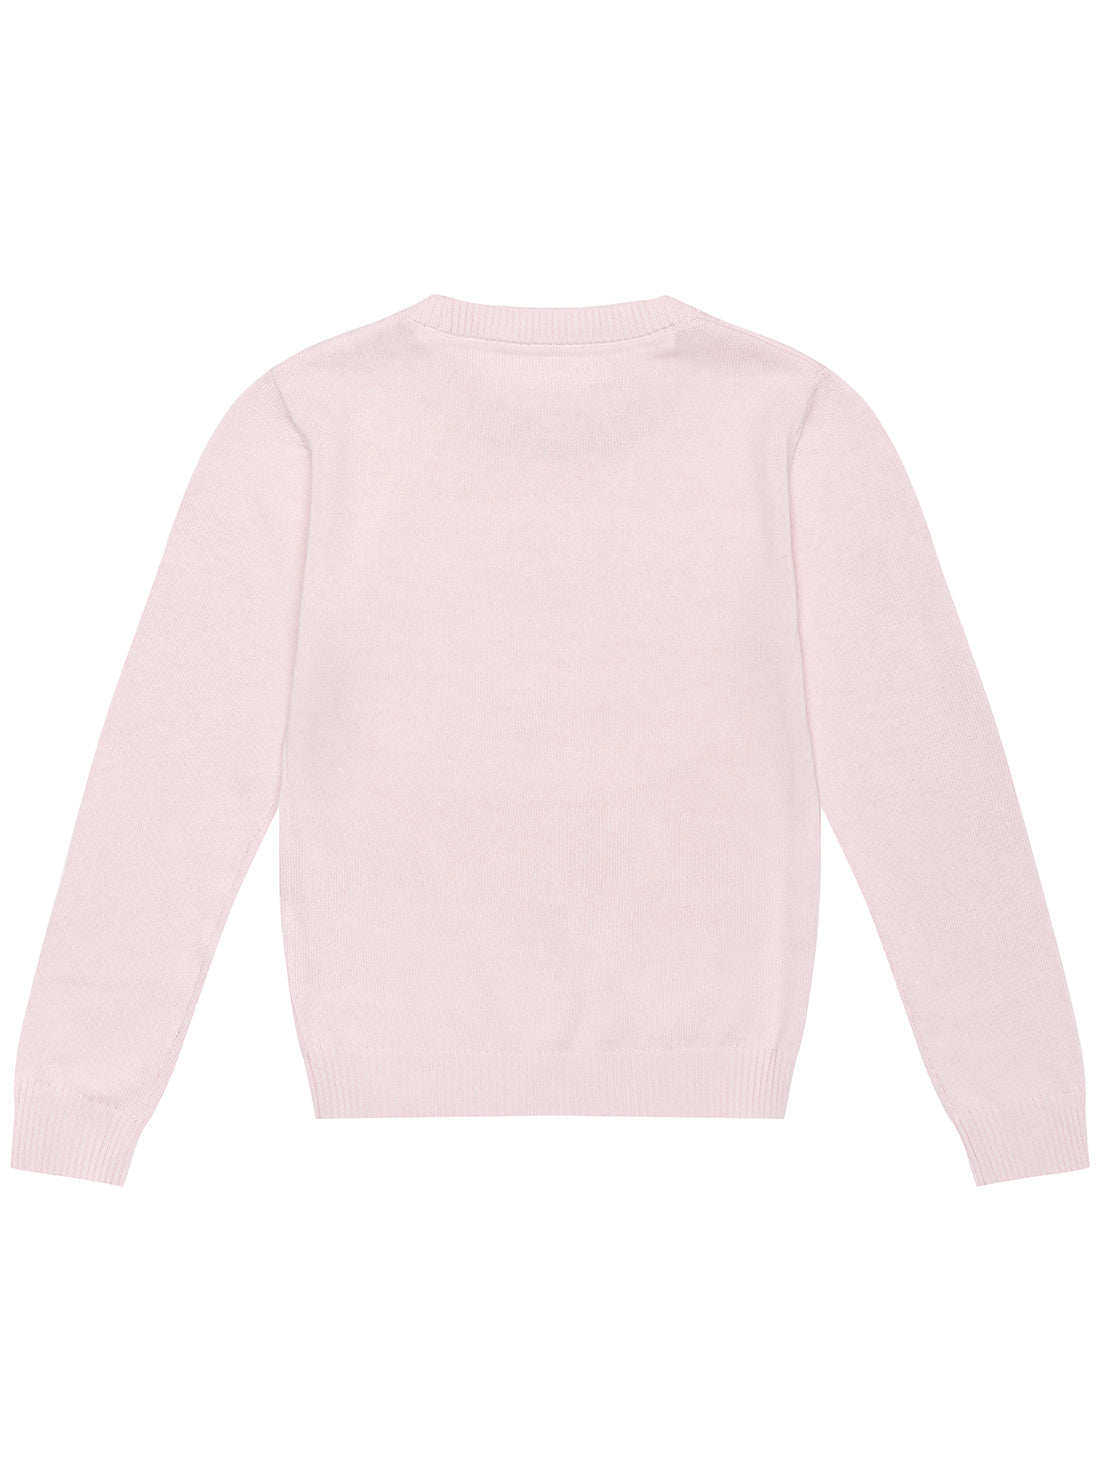 GUESS Ballet Pink Long Sleeve Logo Knit Top (2-7) back view